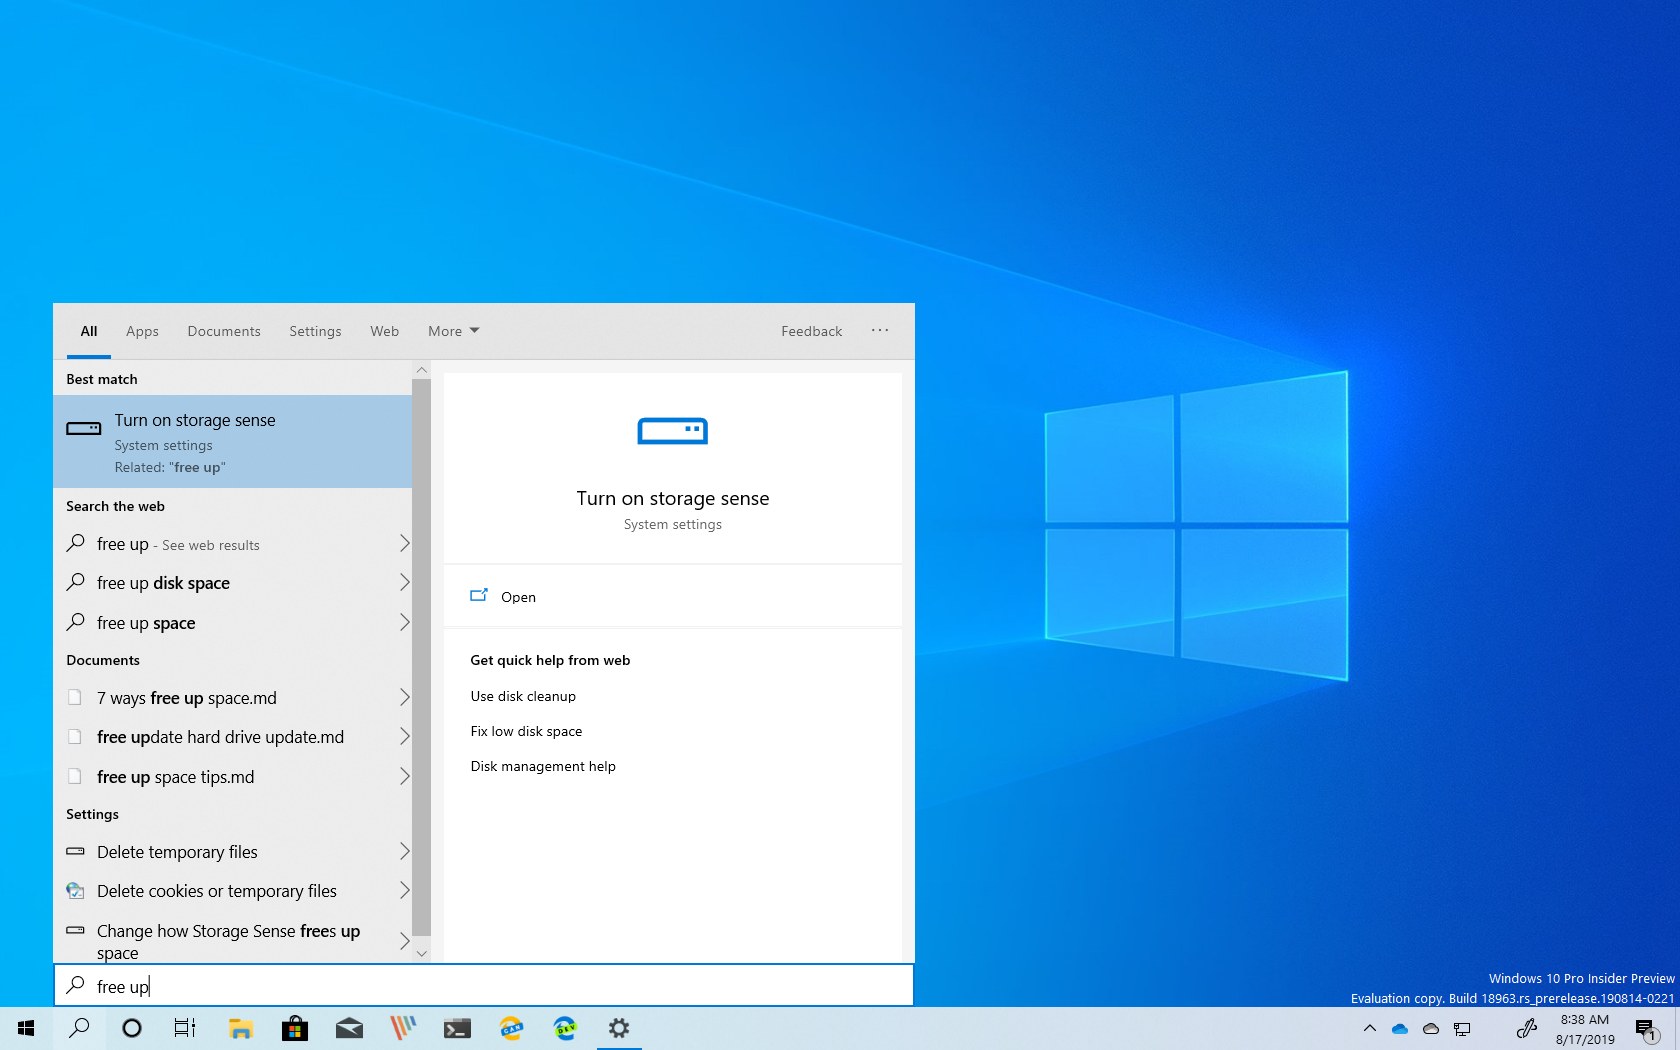 Windows 10 build 18963 new features